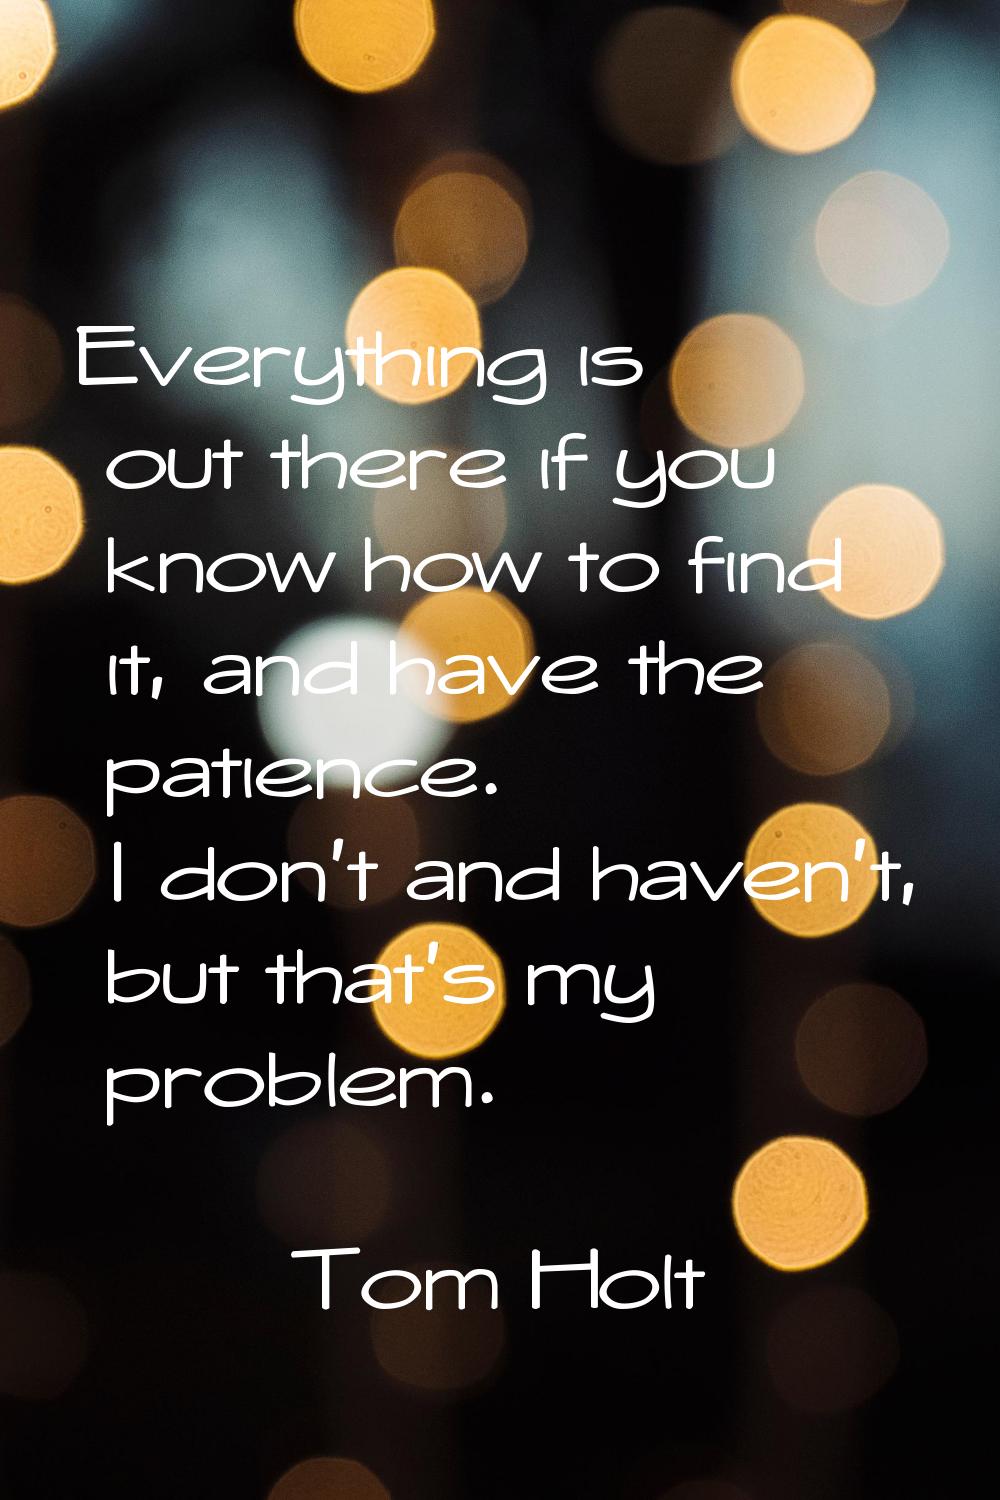 Everything is out there if you know how to find it, and have the patience. I don't and haven't, but